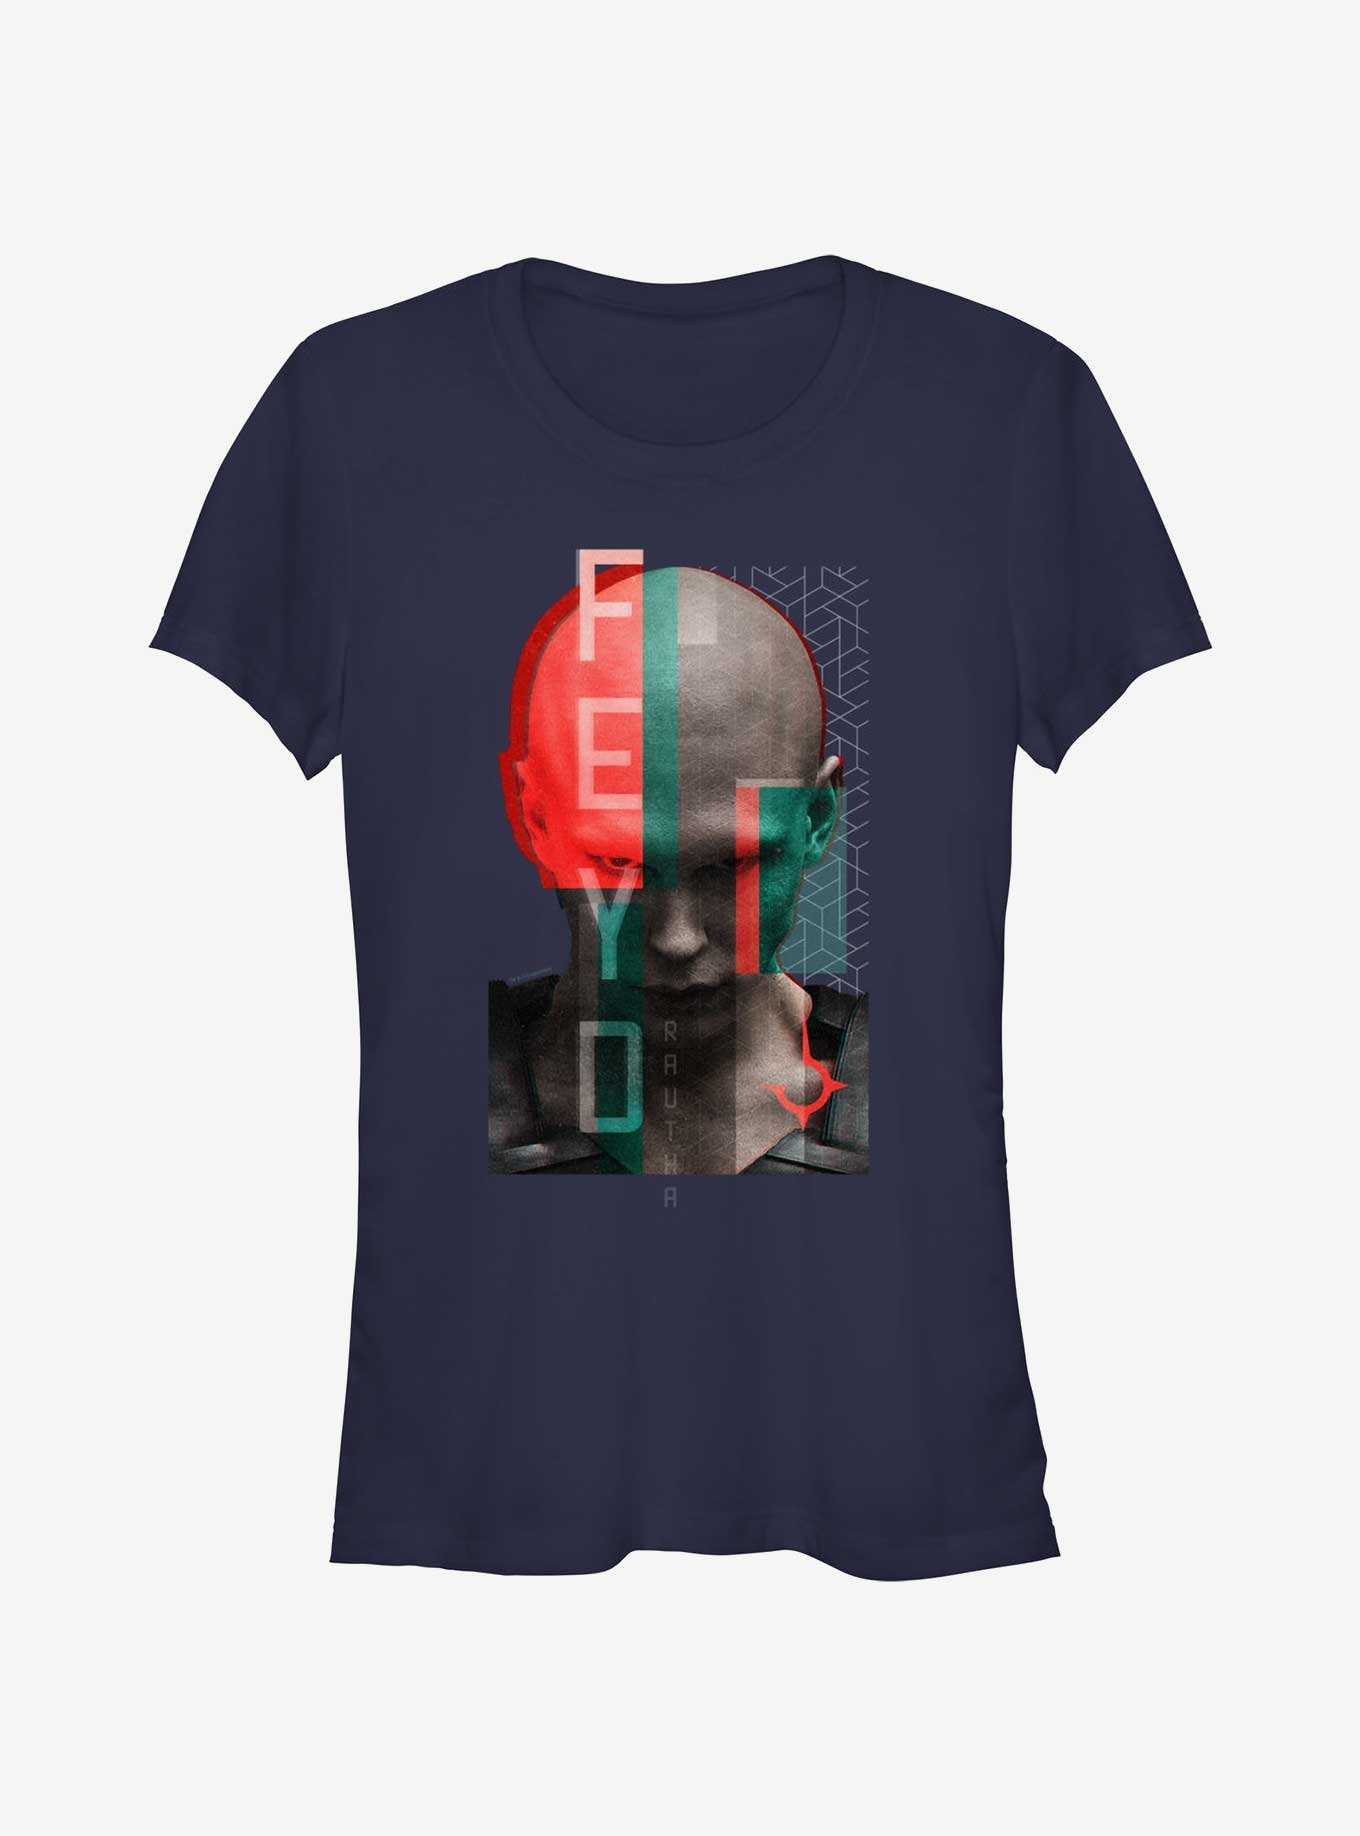 Dune: Part Two Feyd Bust Girls T-Shirt, , hi-res